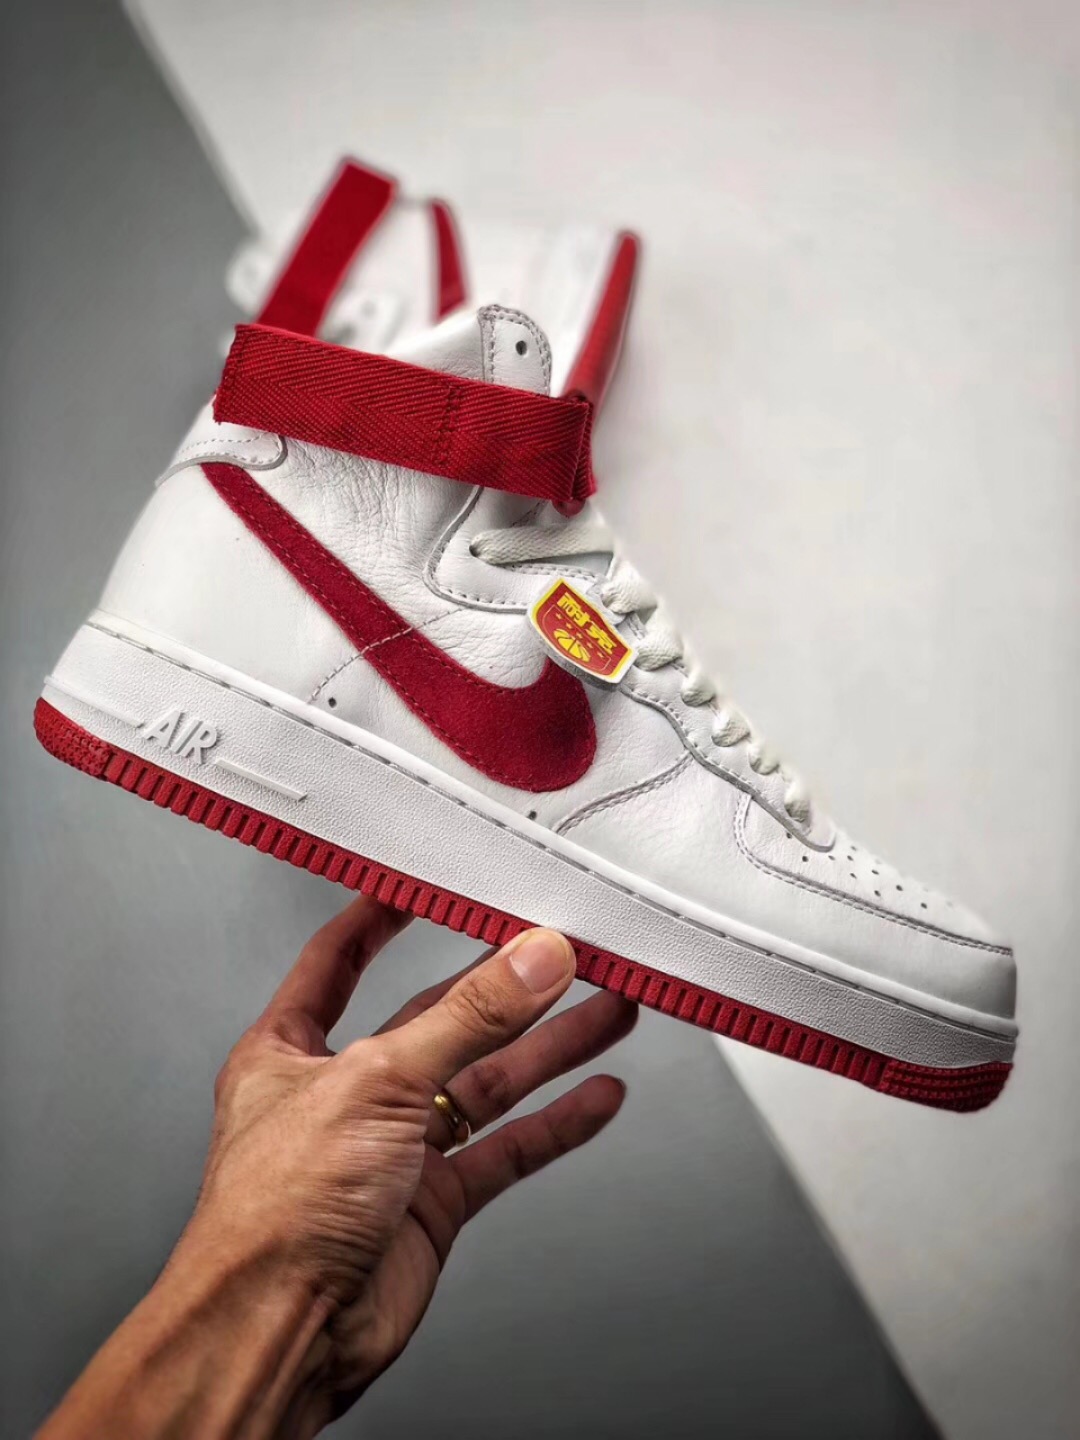 Authentic Nike Air Force 1 High 